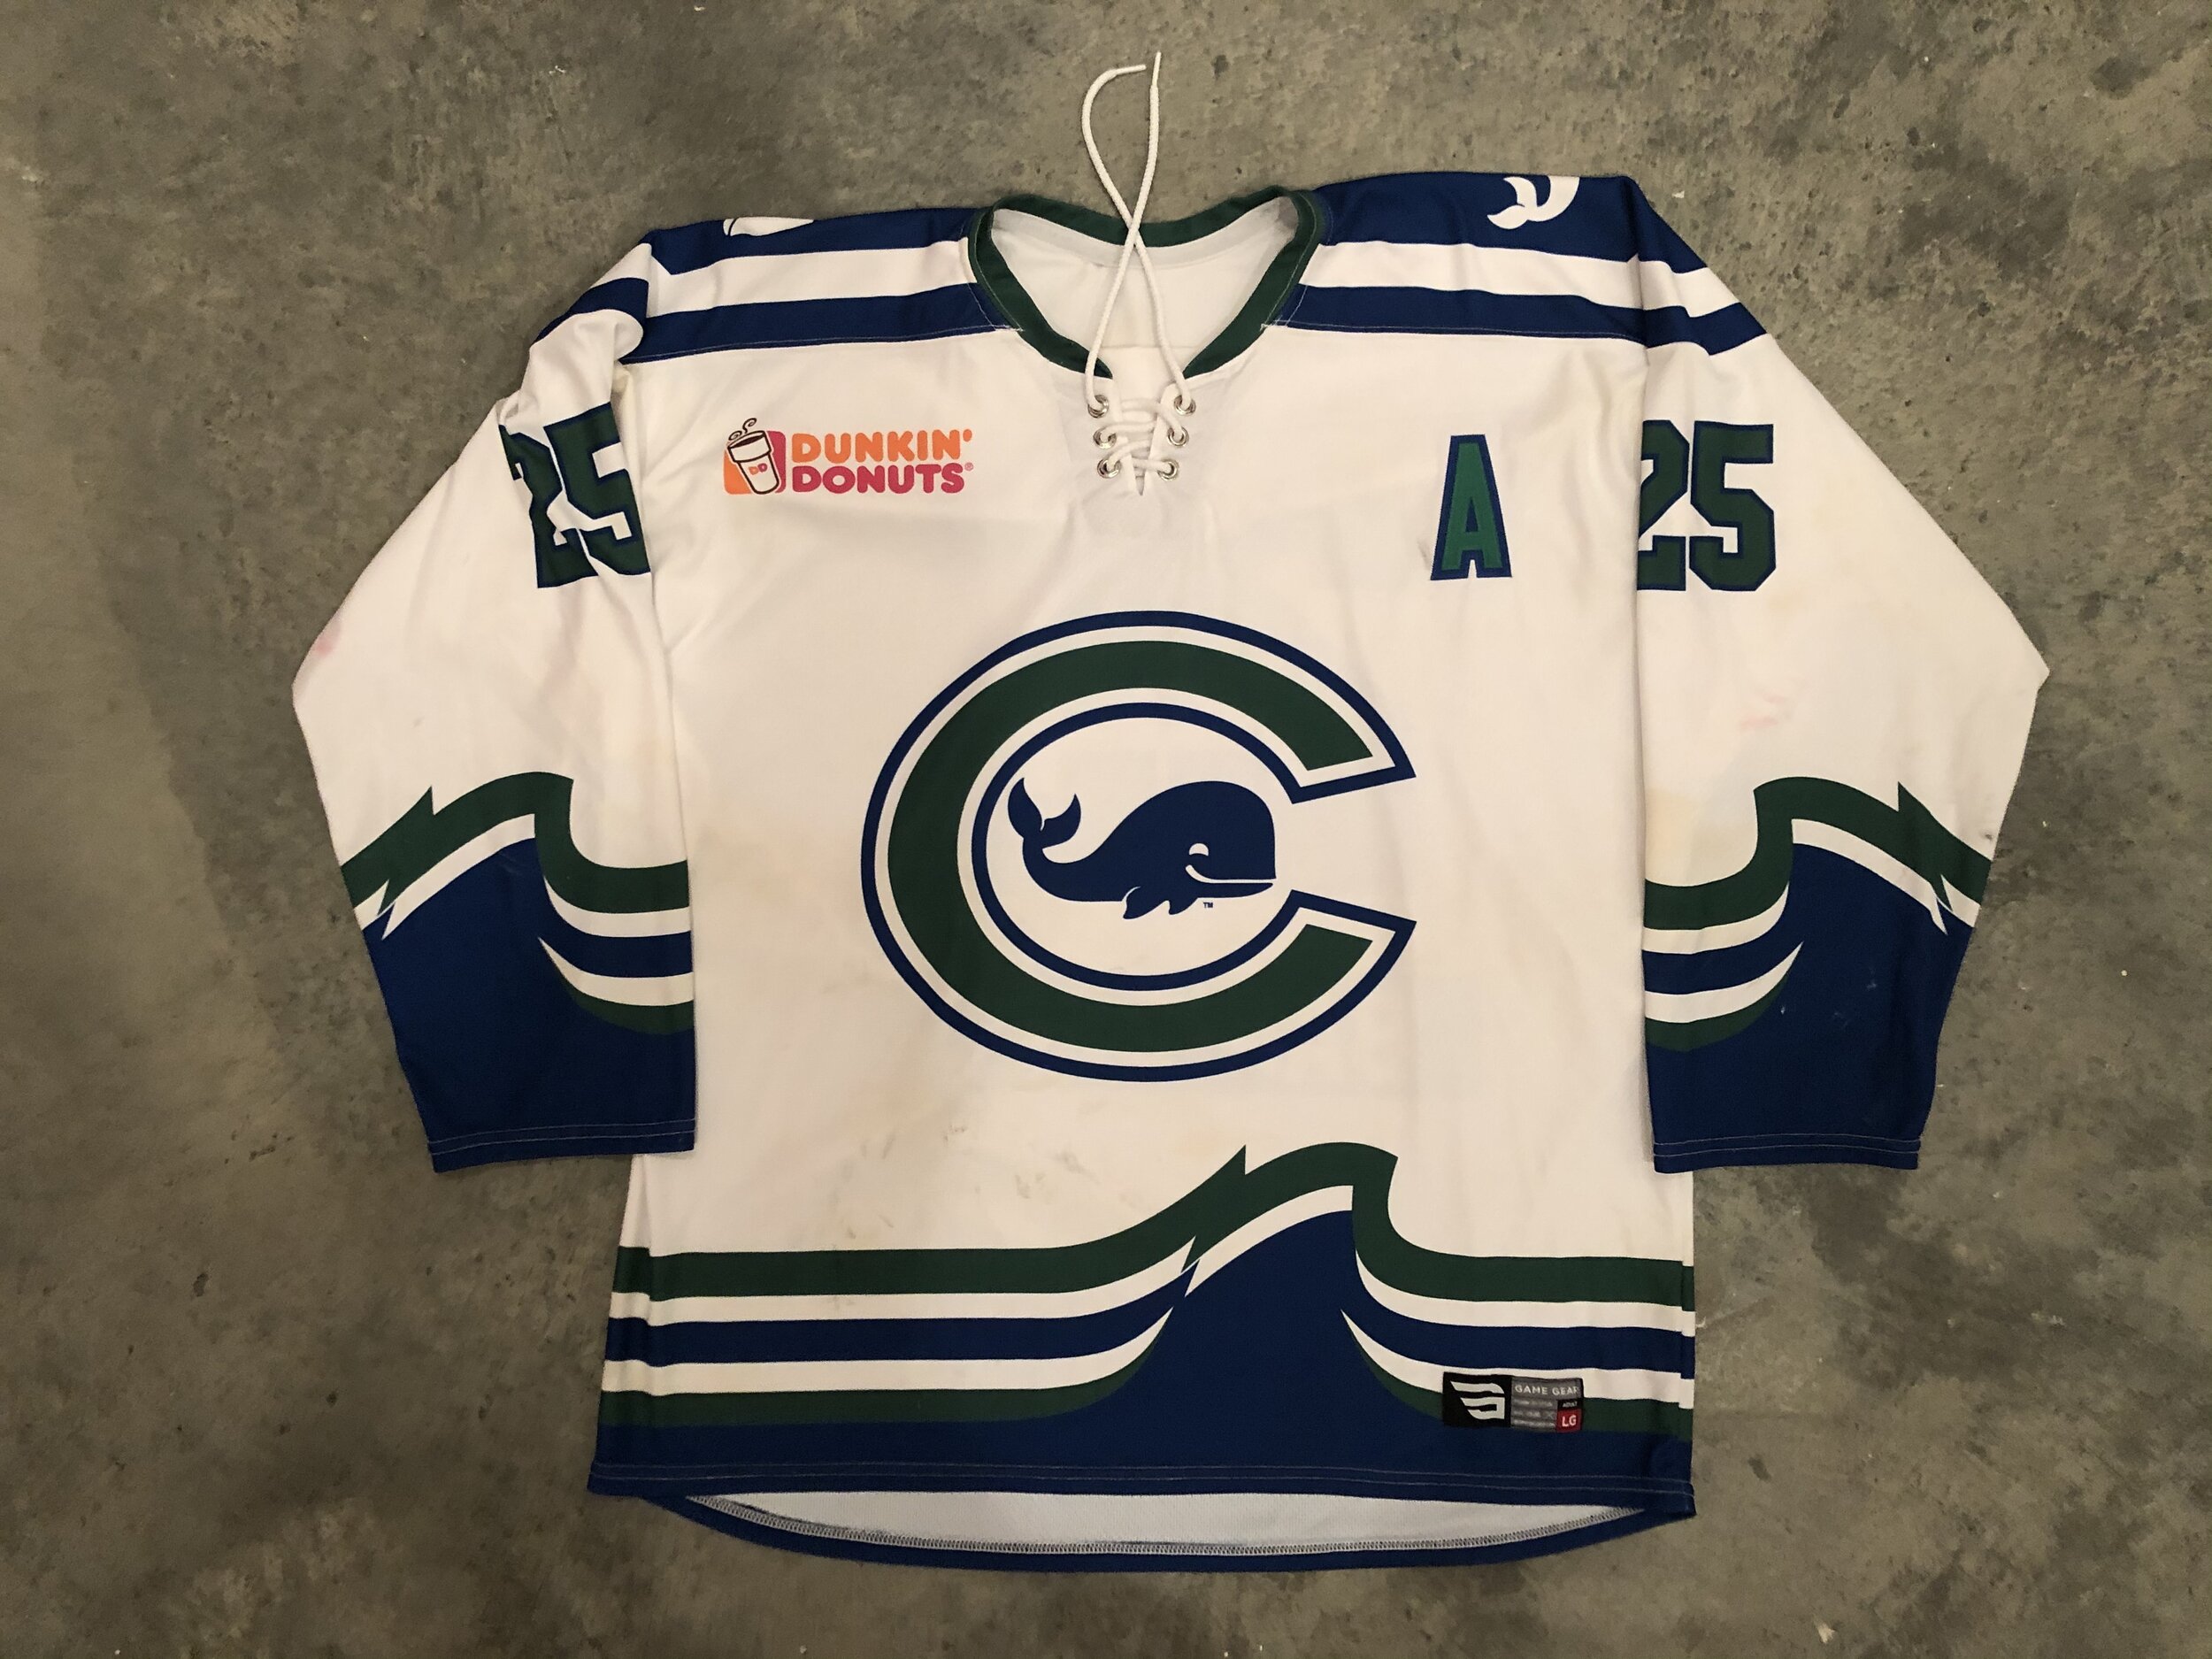 Connecticut Whale 2012 - 2013 Game Worn Jersey